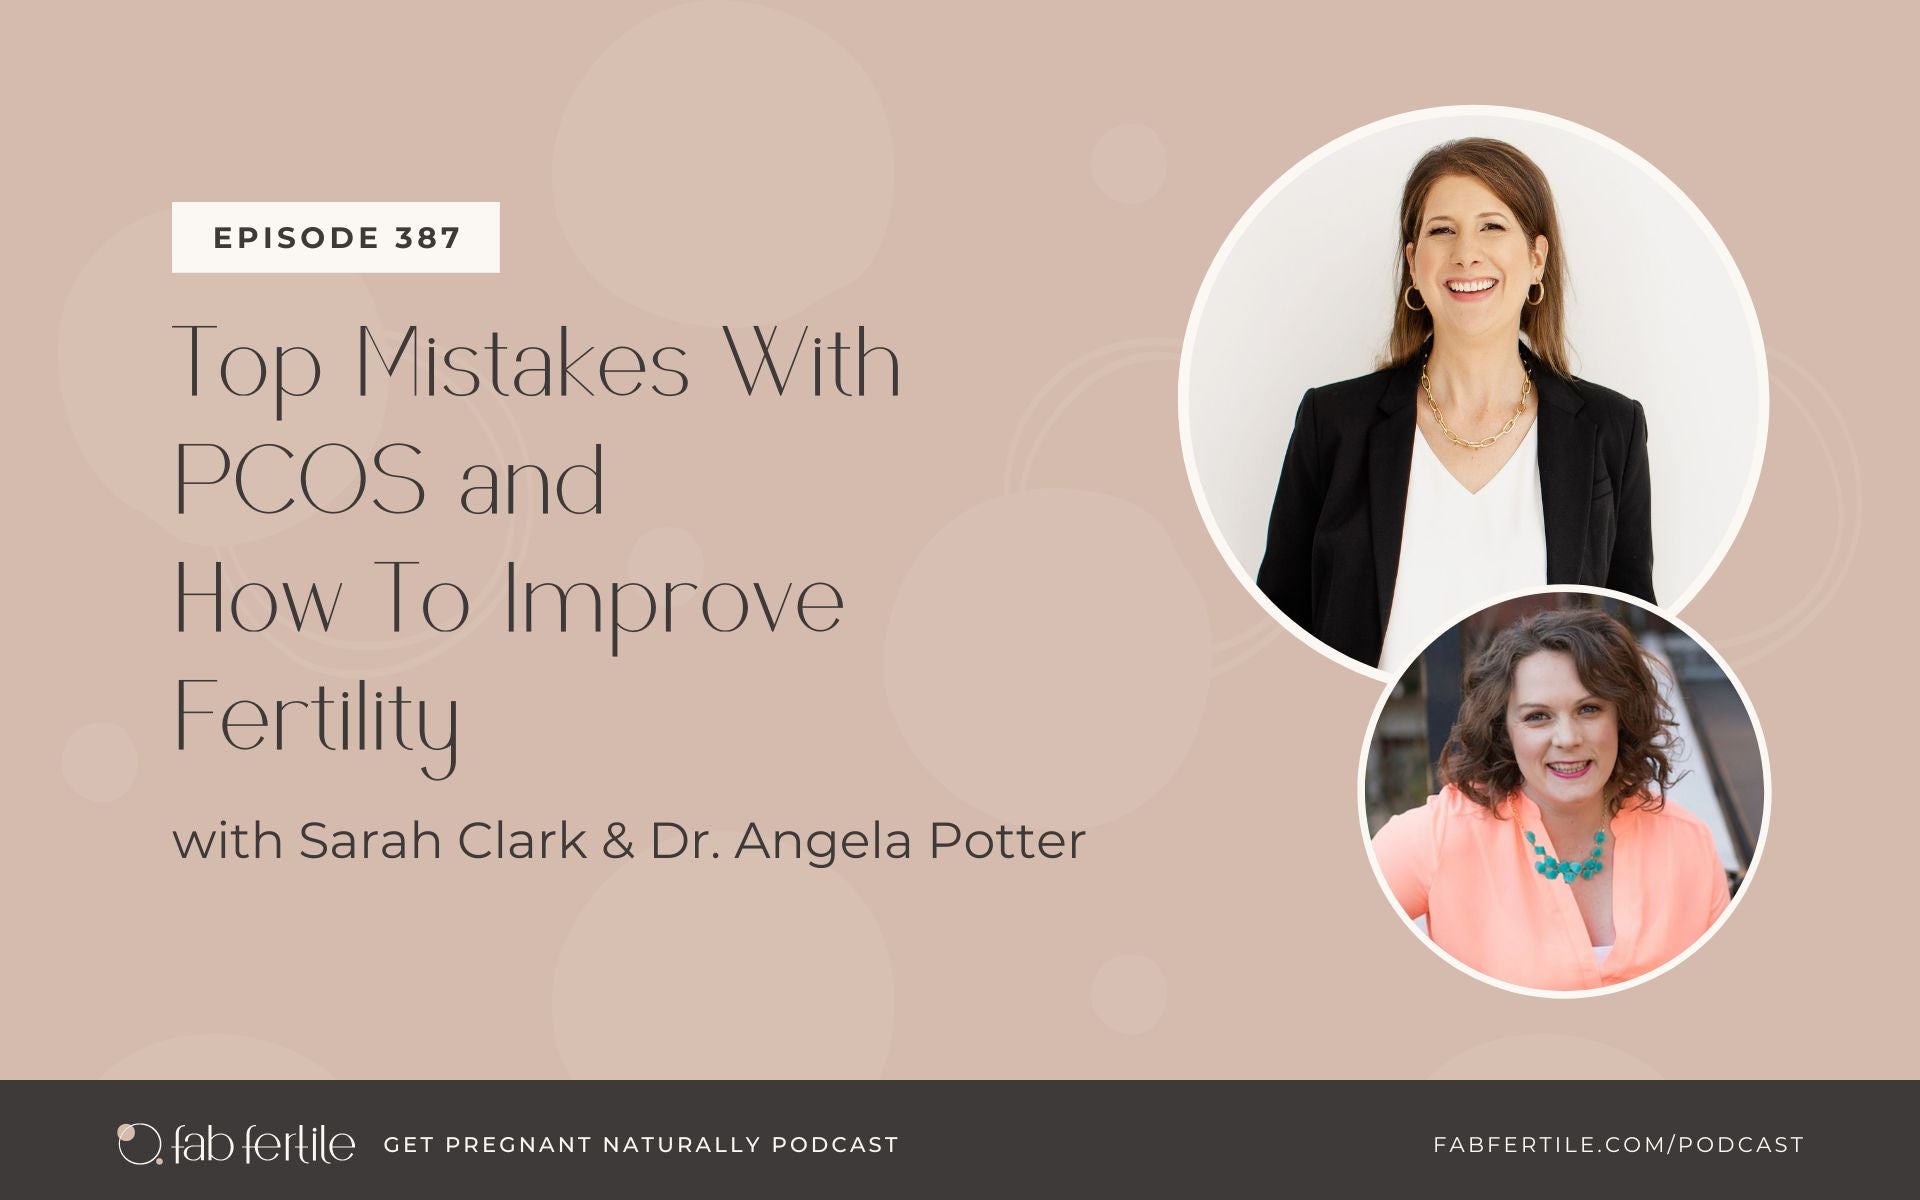 Top Mistakes With PCOS and How To Improve Fertility